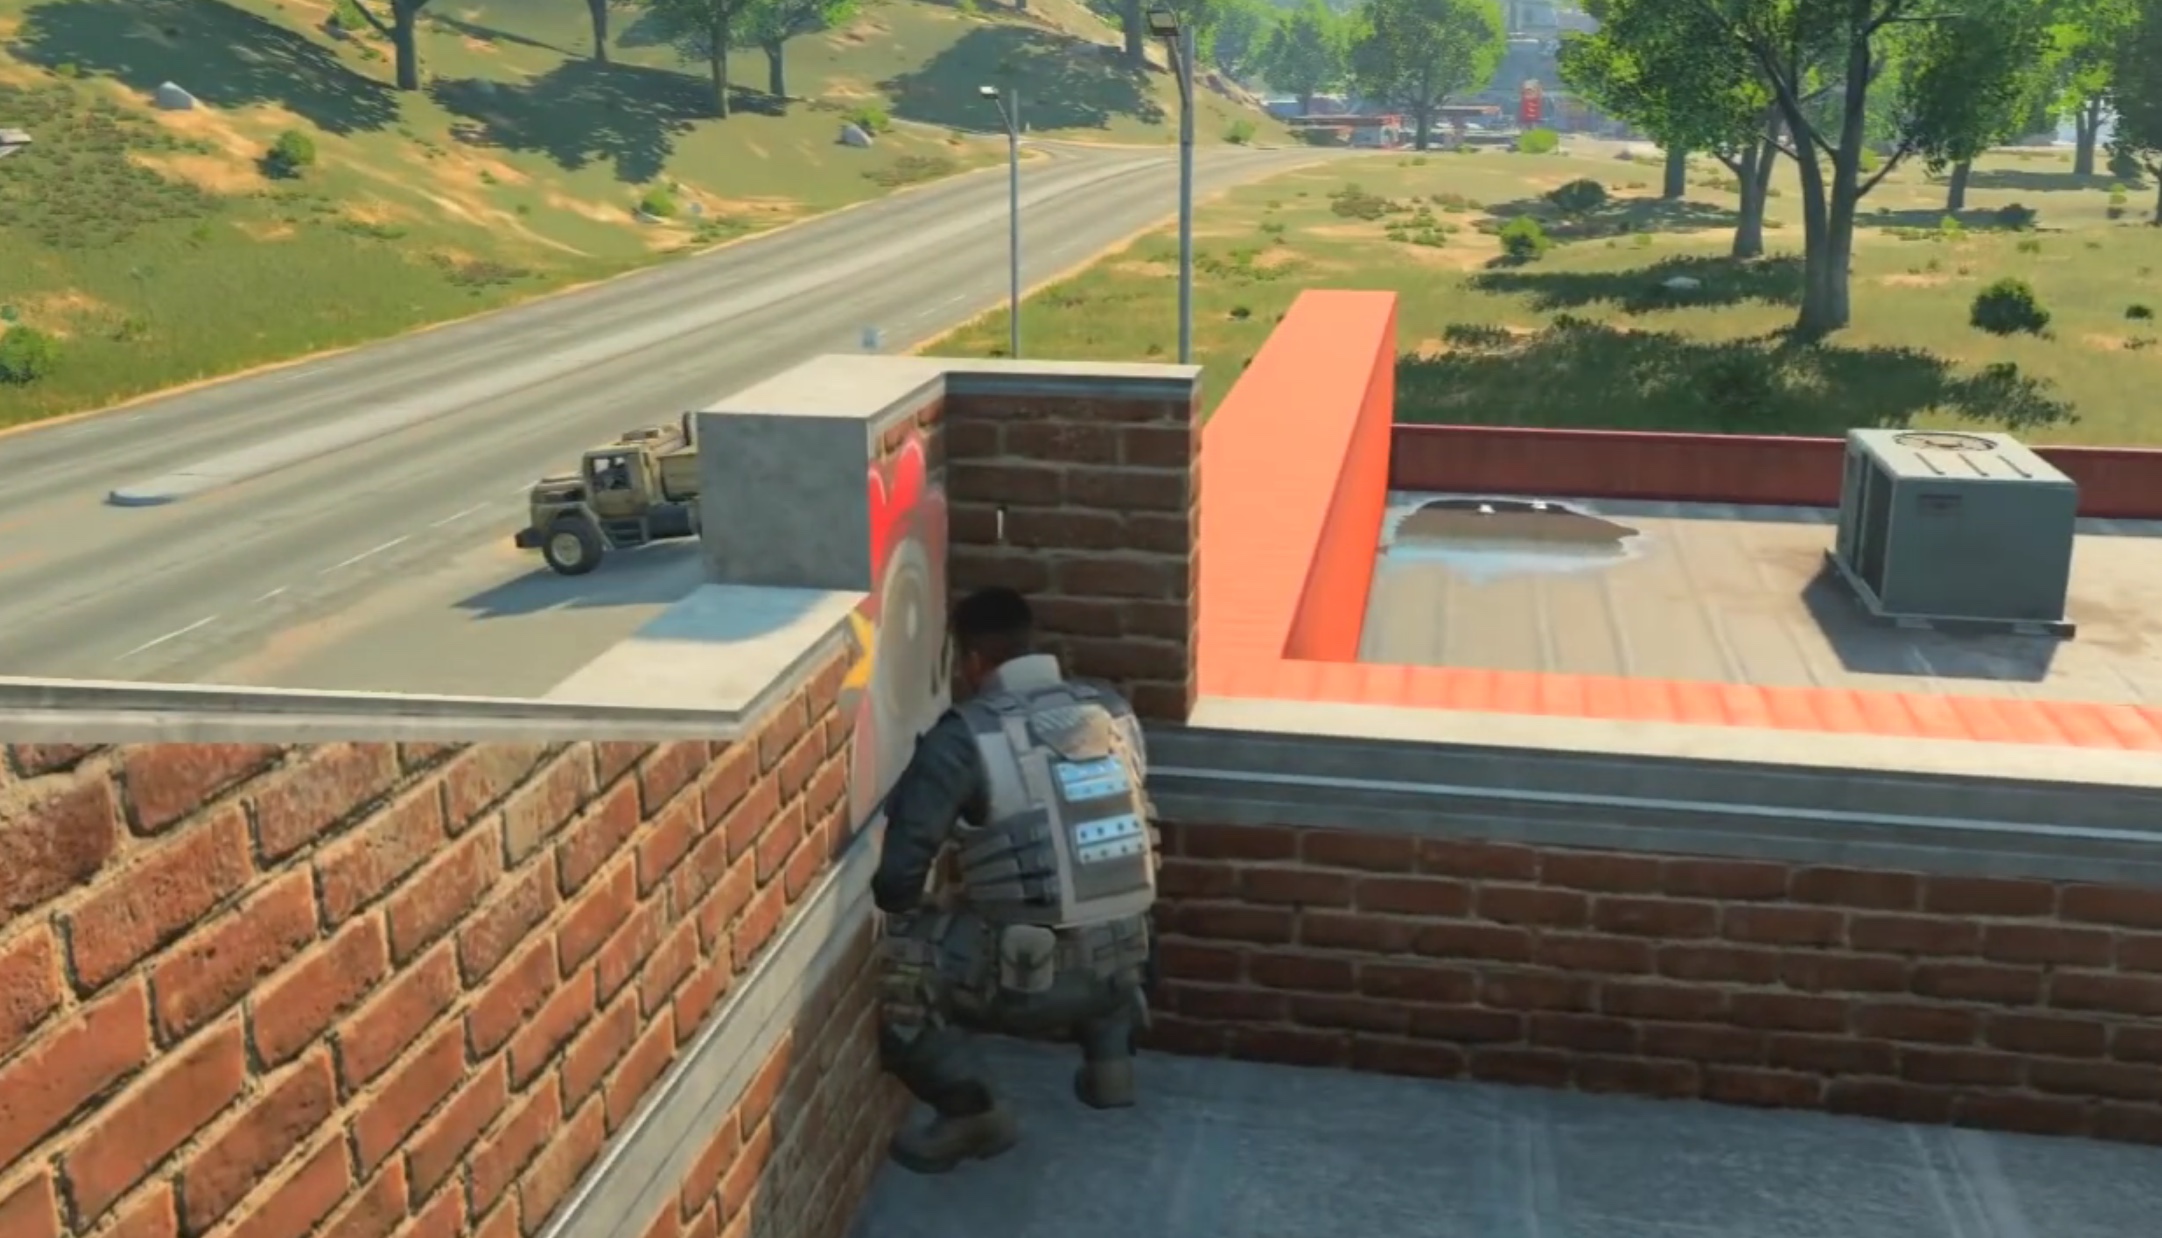 Players are Exploiting Emote Peeking In Call of Duty: Black Ops 4